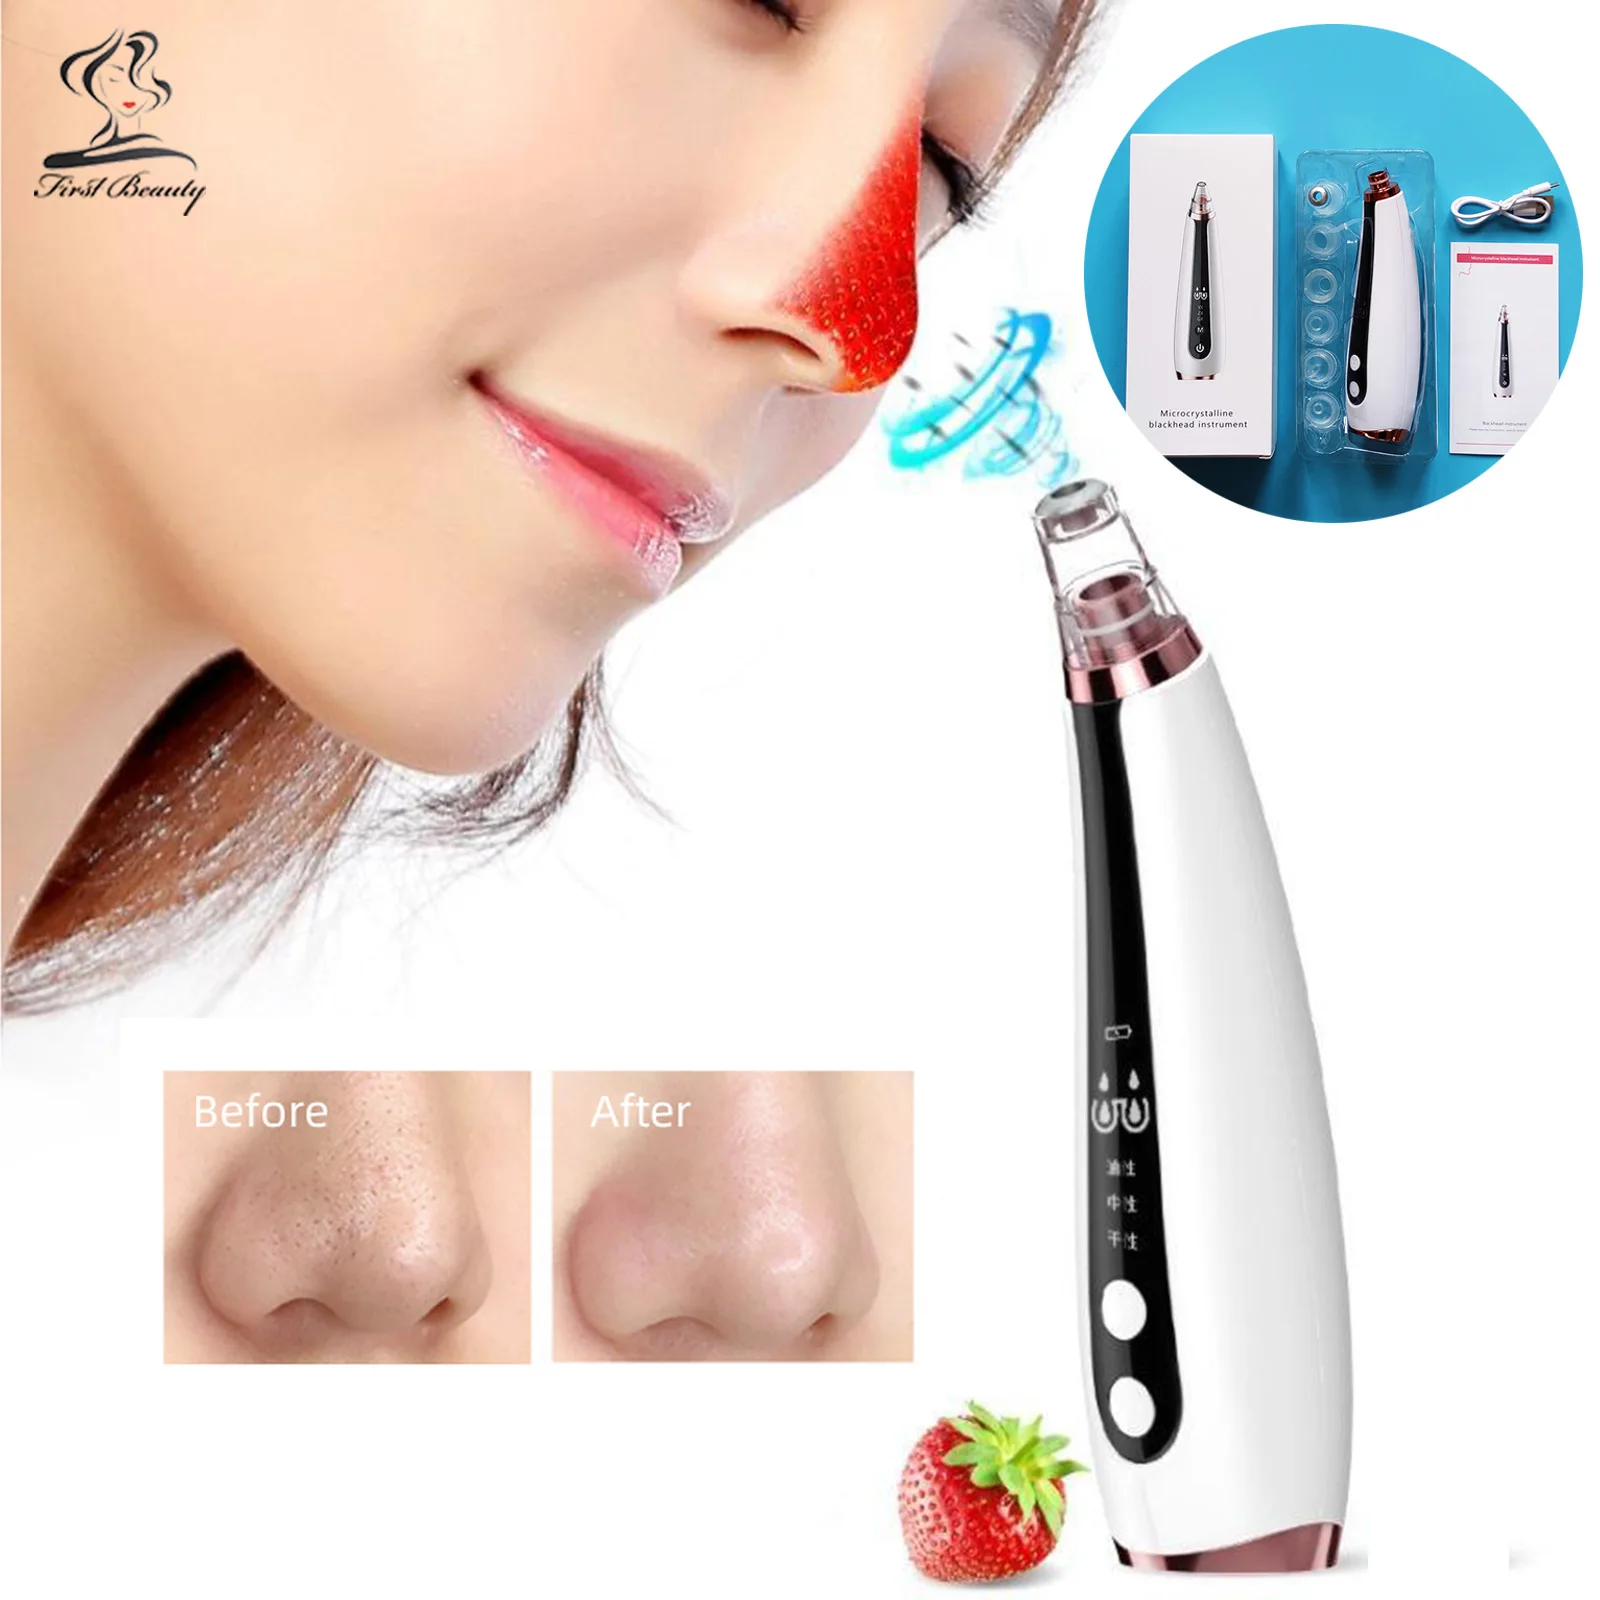 

Electric Blackhead Remover Vacuum Sucker Face Deep Cleaning Facial Pore Cleaner Skin Care Tools Acne Pimple Comedone Extractor